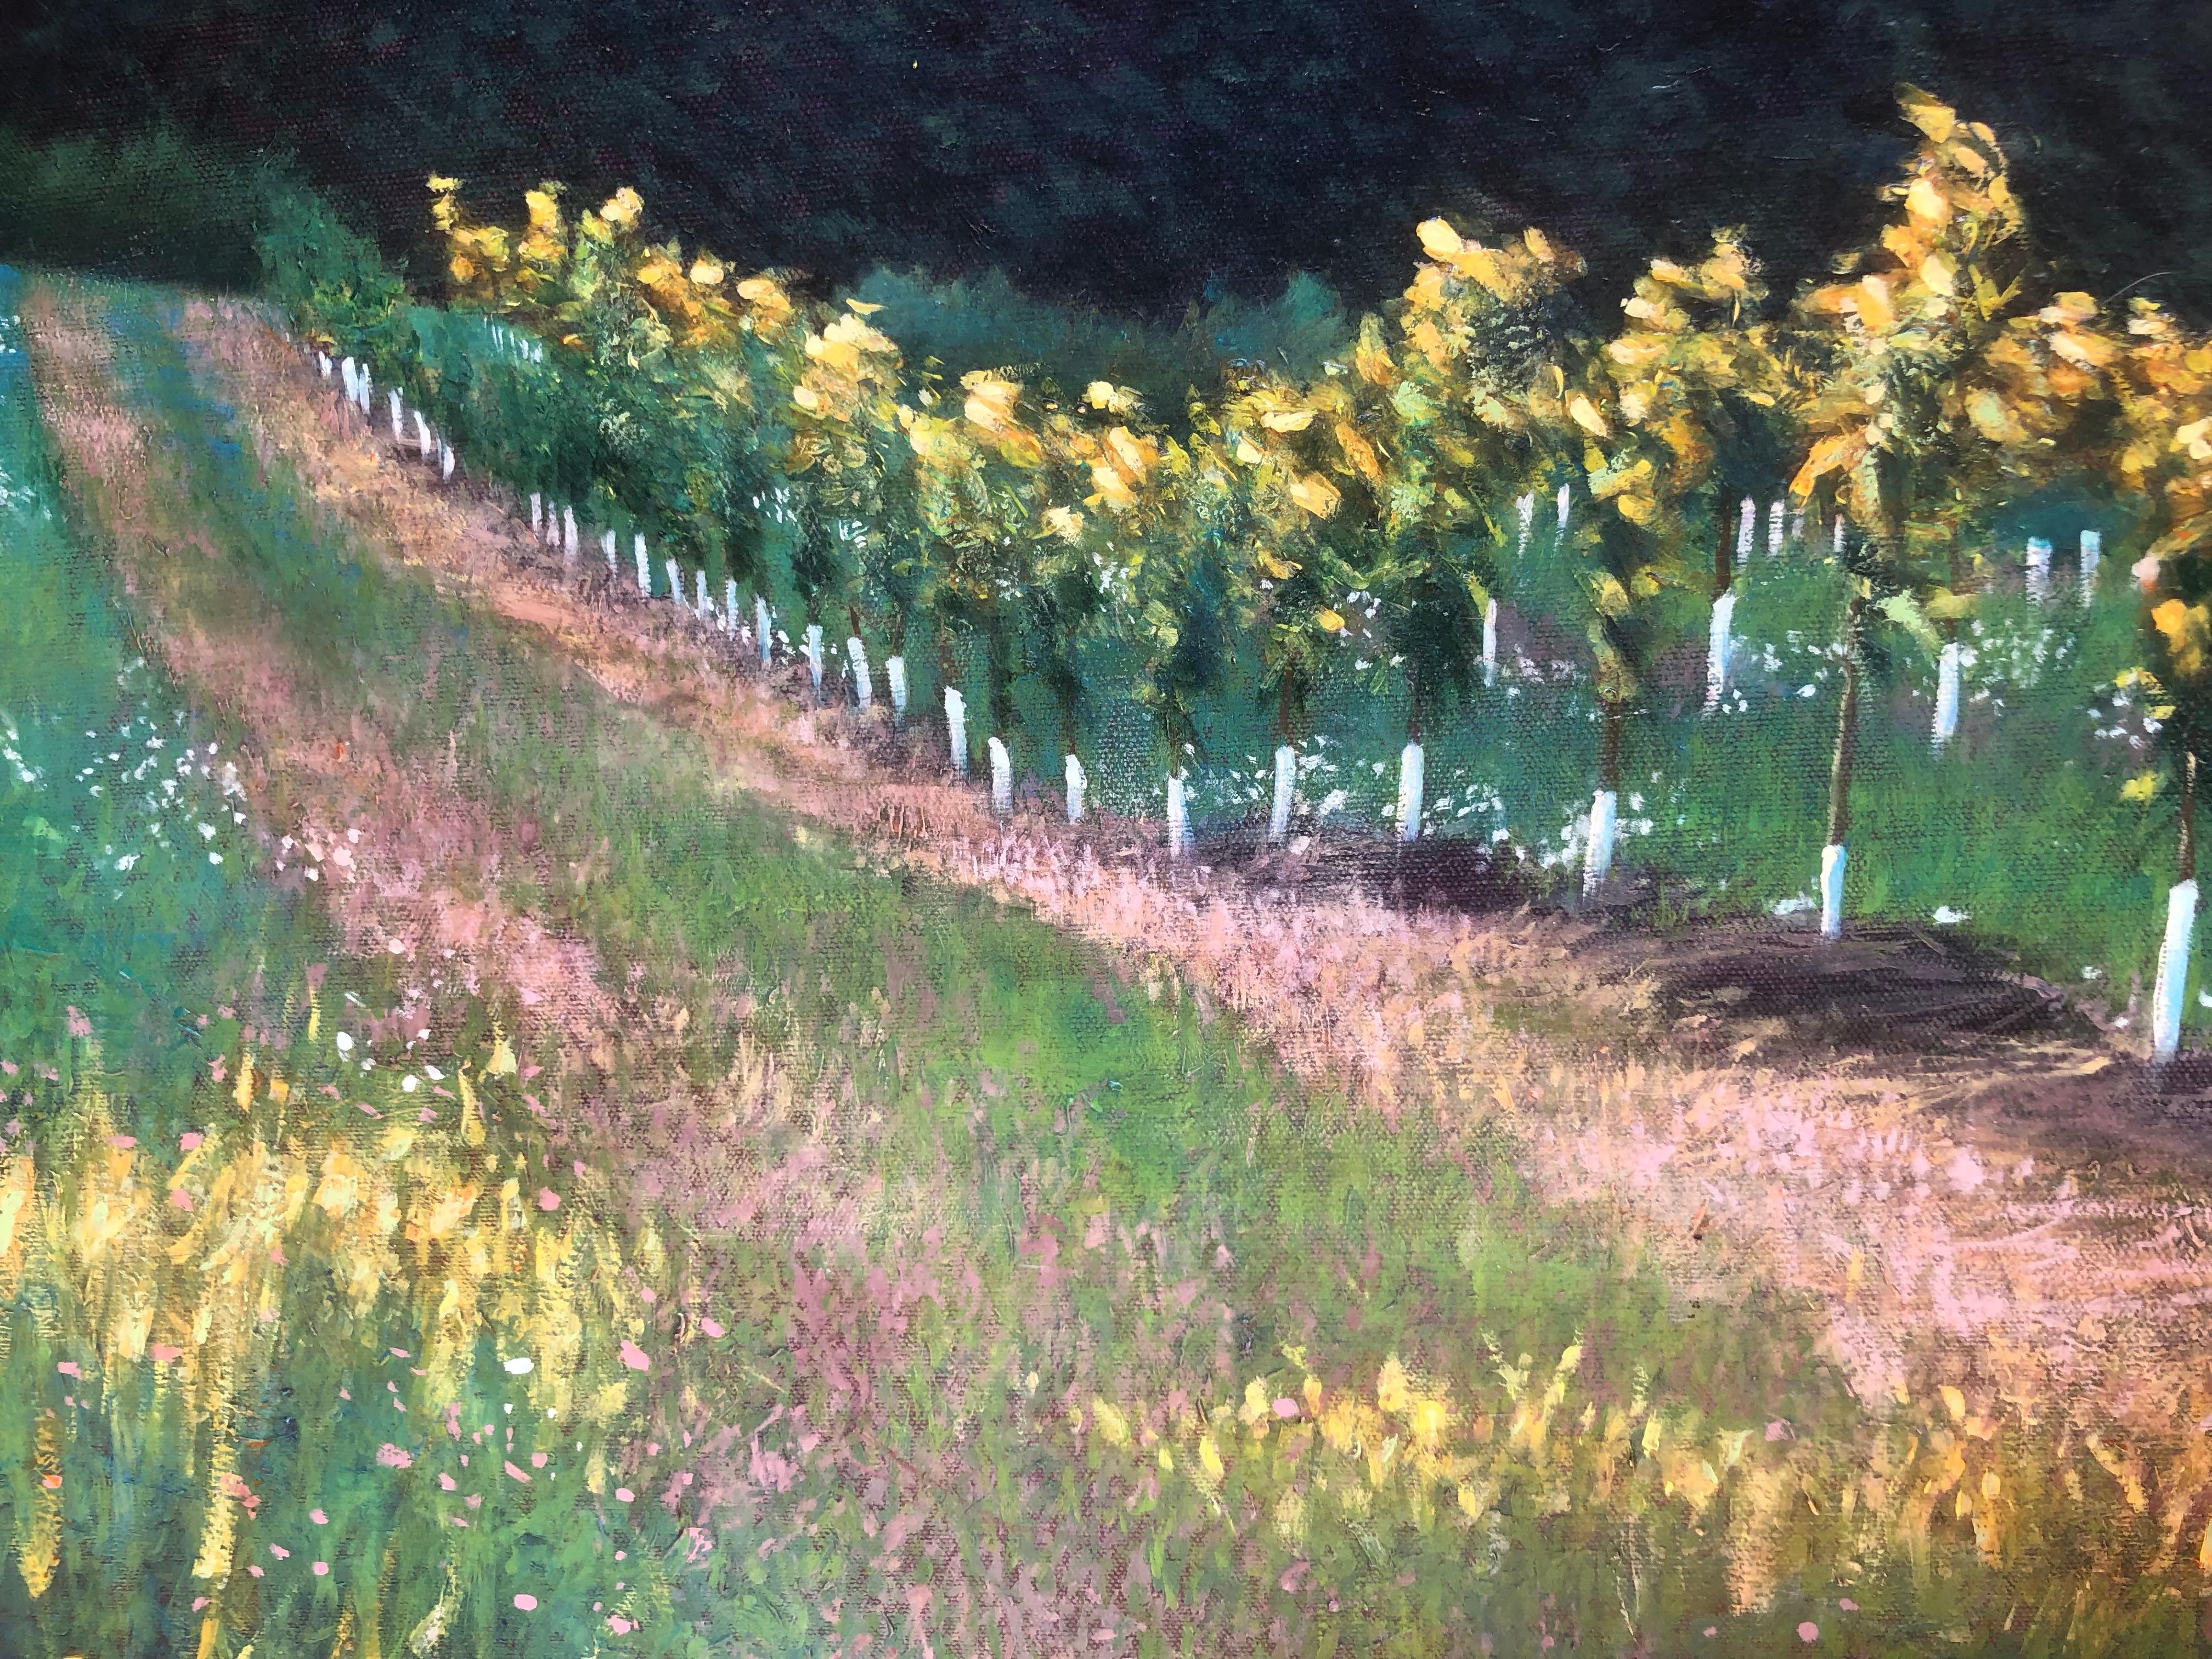 Orchard Path - Original Oil Painting of Orchard and Hills Bathed in Spring Light 4